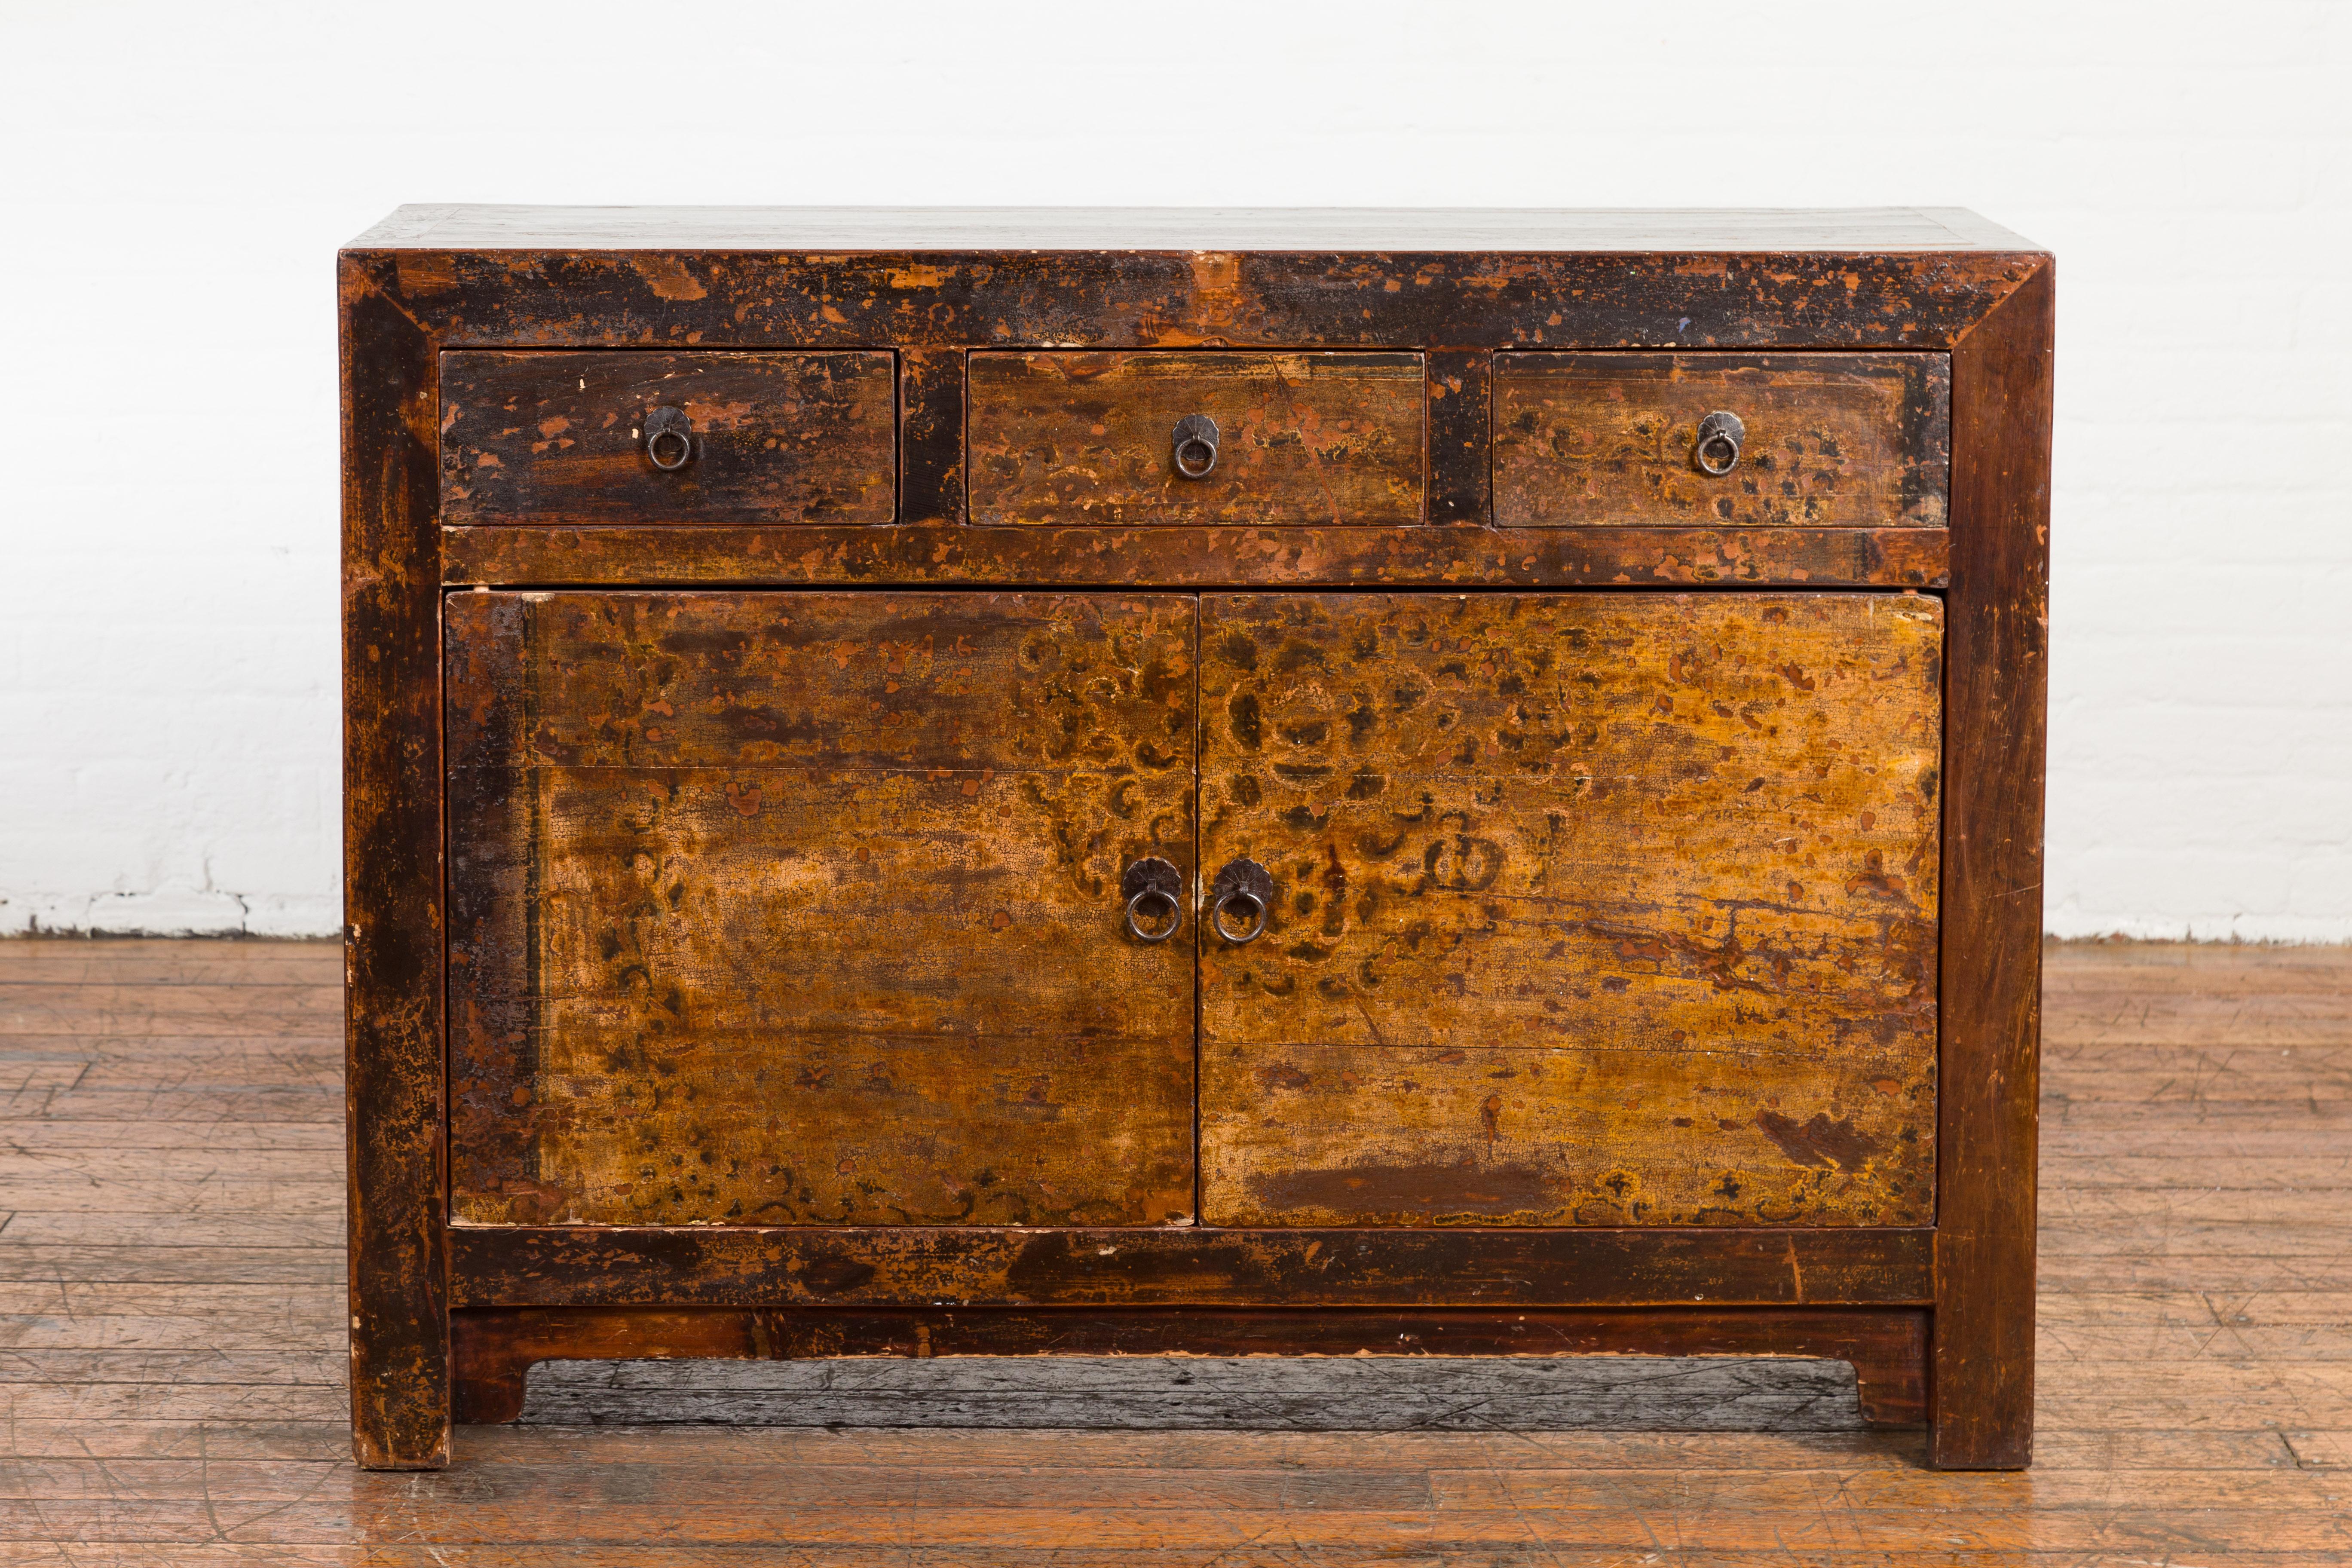 A Vintage Northern Chinese sideboard cabinet from the Mid-20th Century, with distressed appearance and three drawers over two doors. Created in Northern China or Mongolia during the Midcentury period, this sideboard captures the attention with its